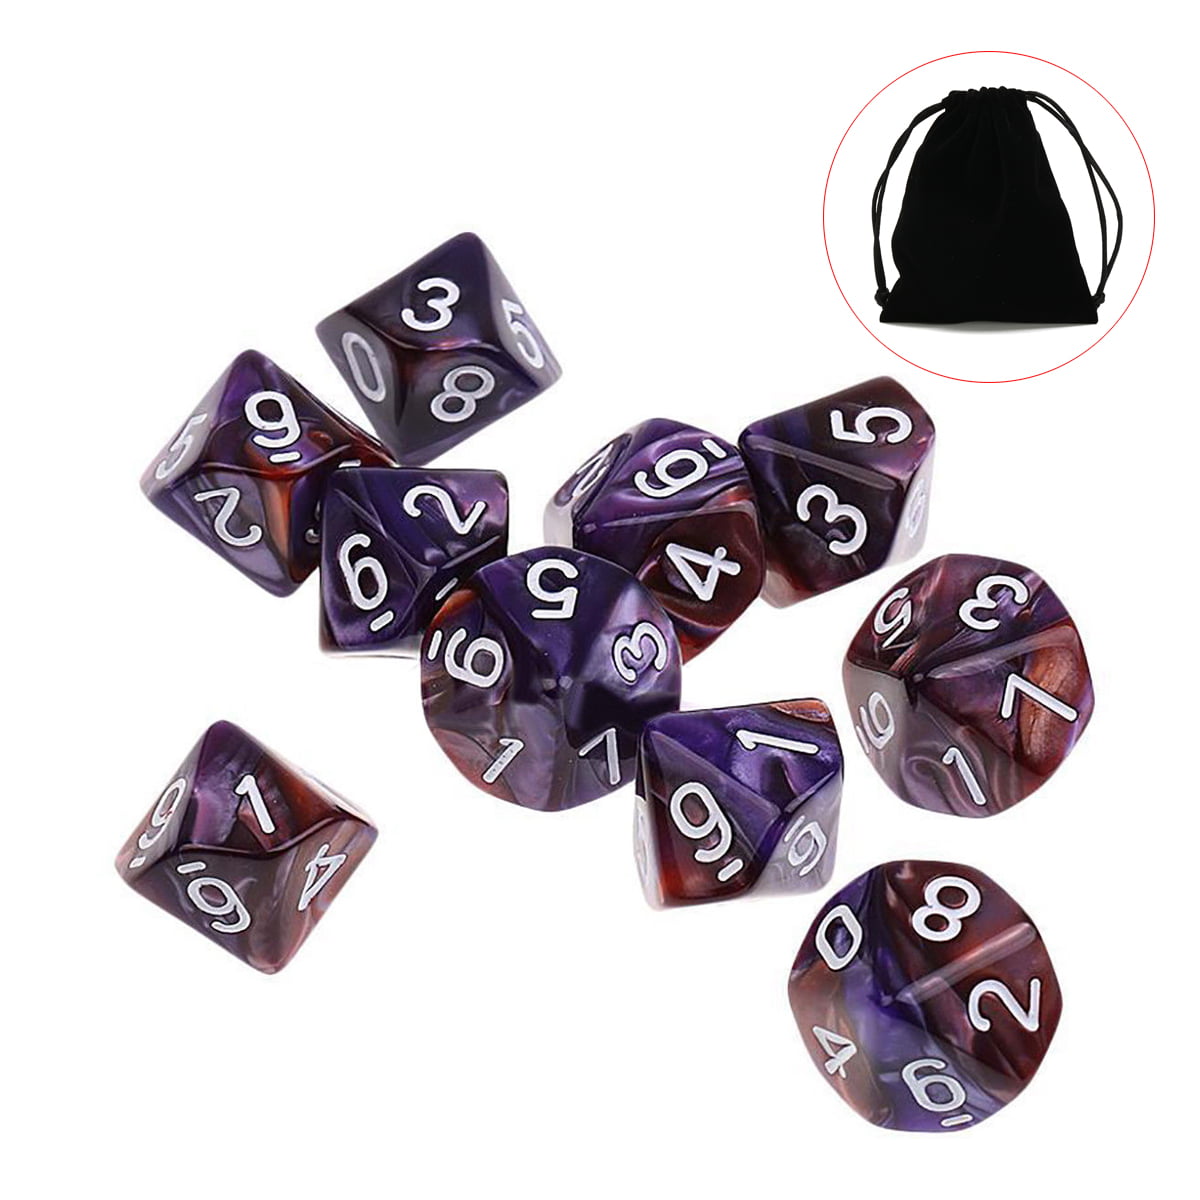 10x Digital Dices Multi-sided Dice Set for RPG Playing Game Toy Purple